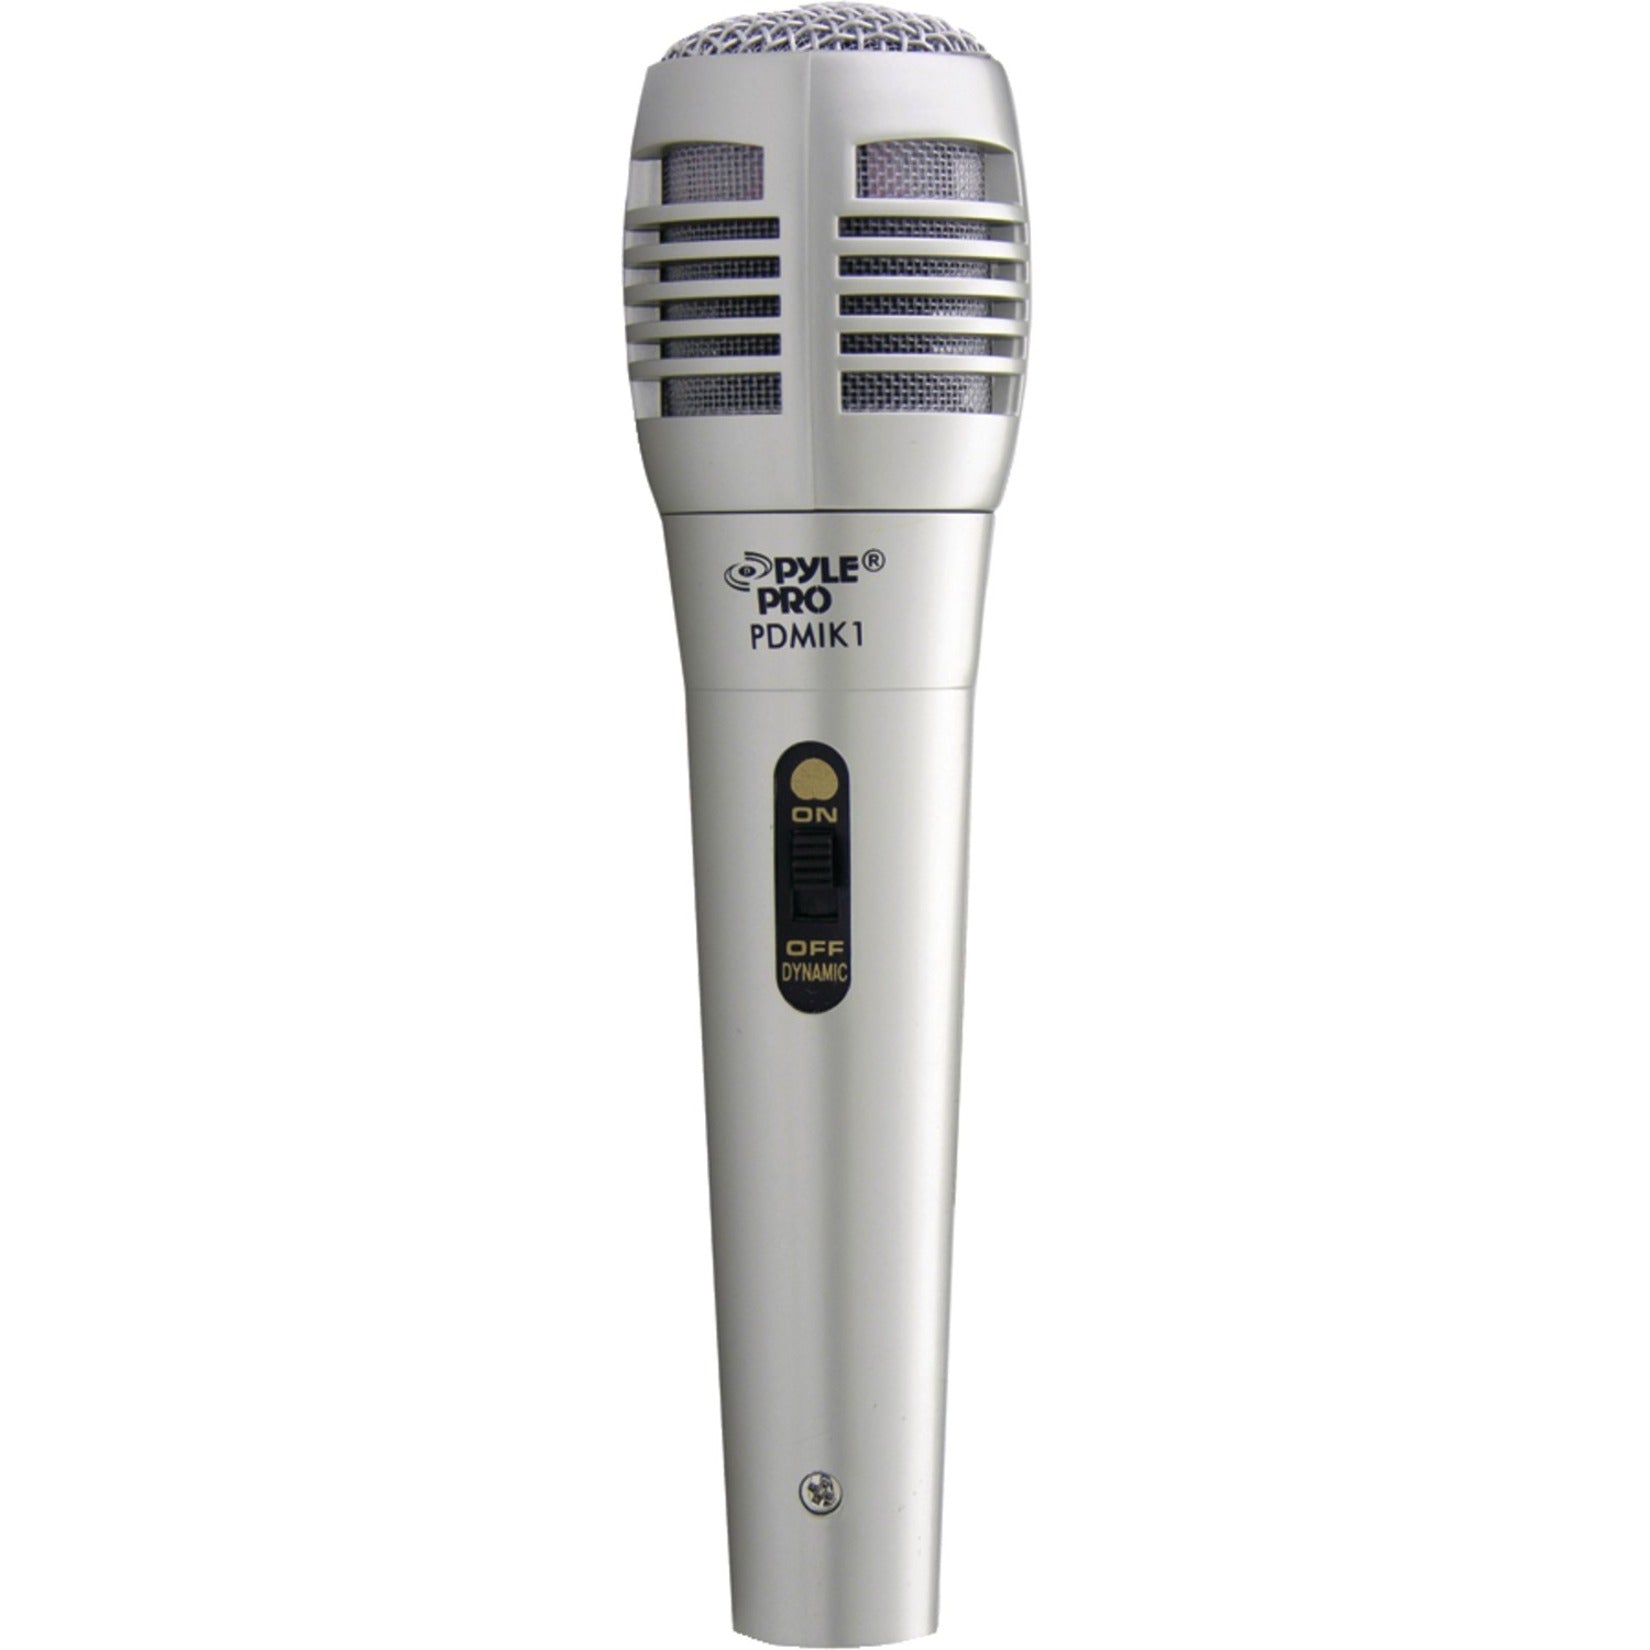 PylePro PDMIK1 Wired Dynamic Microphone, Handheld Mic with Durable Construction and Clear Sound